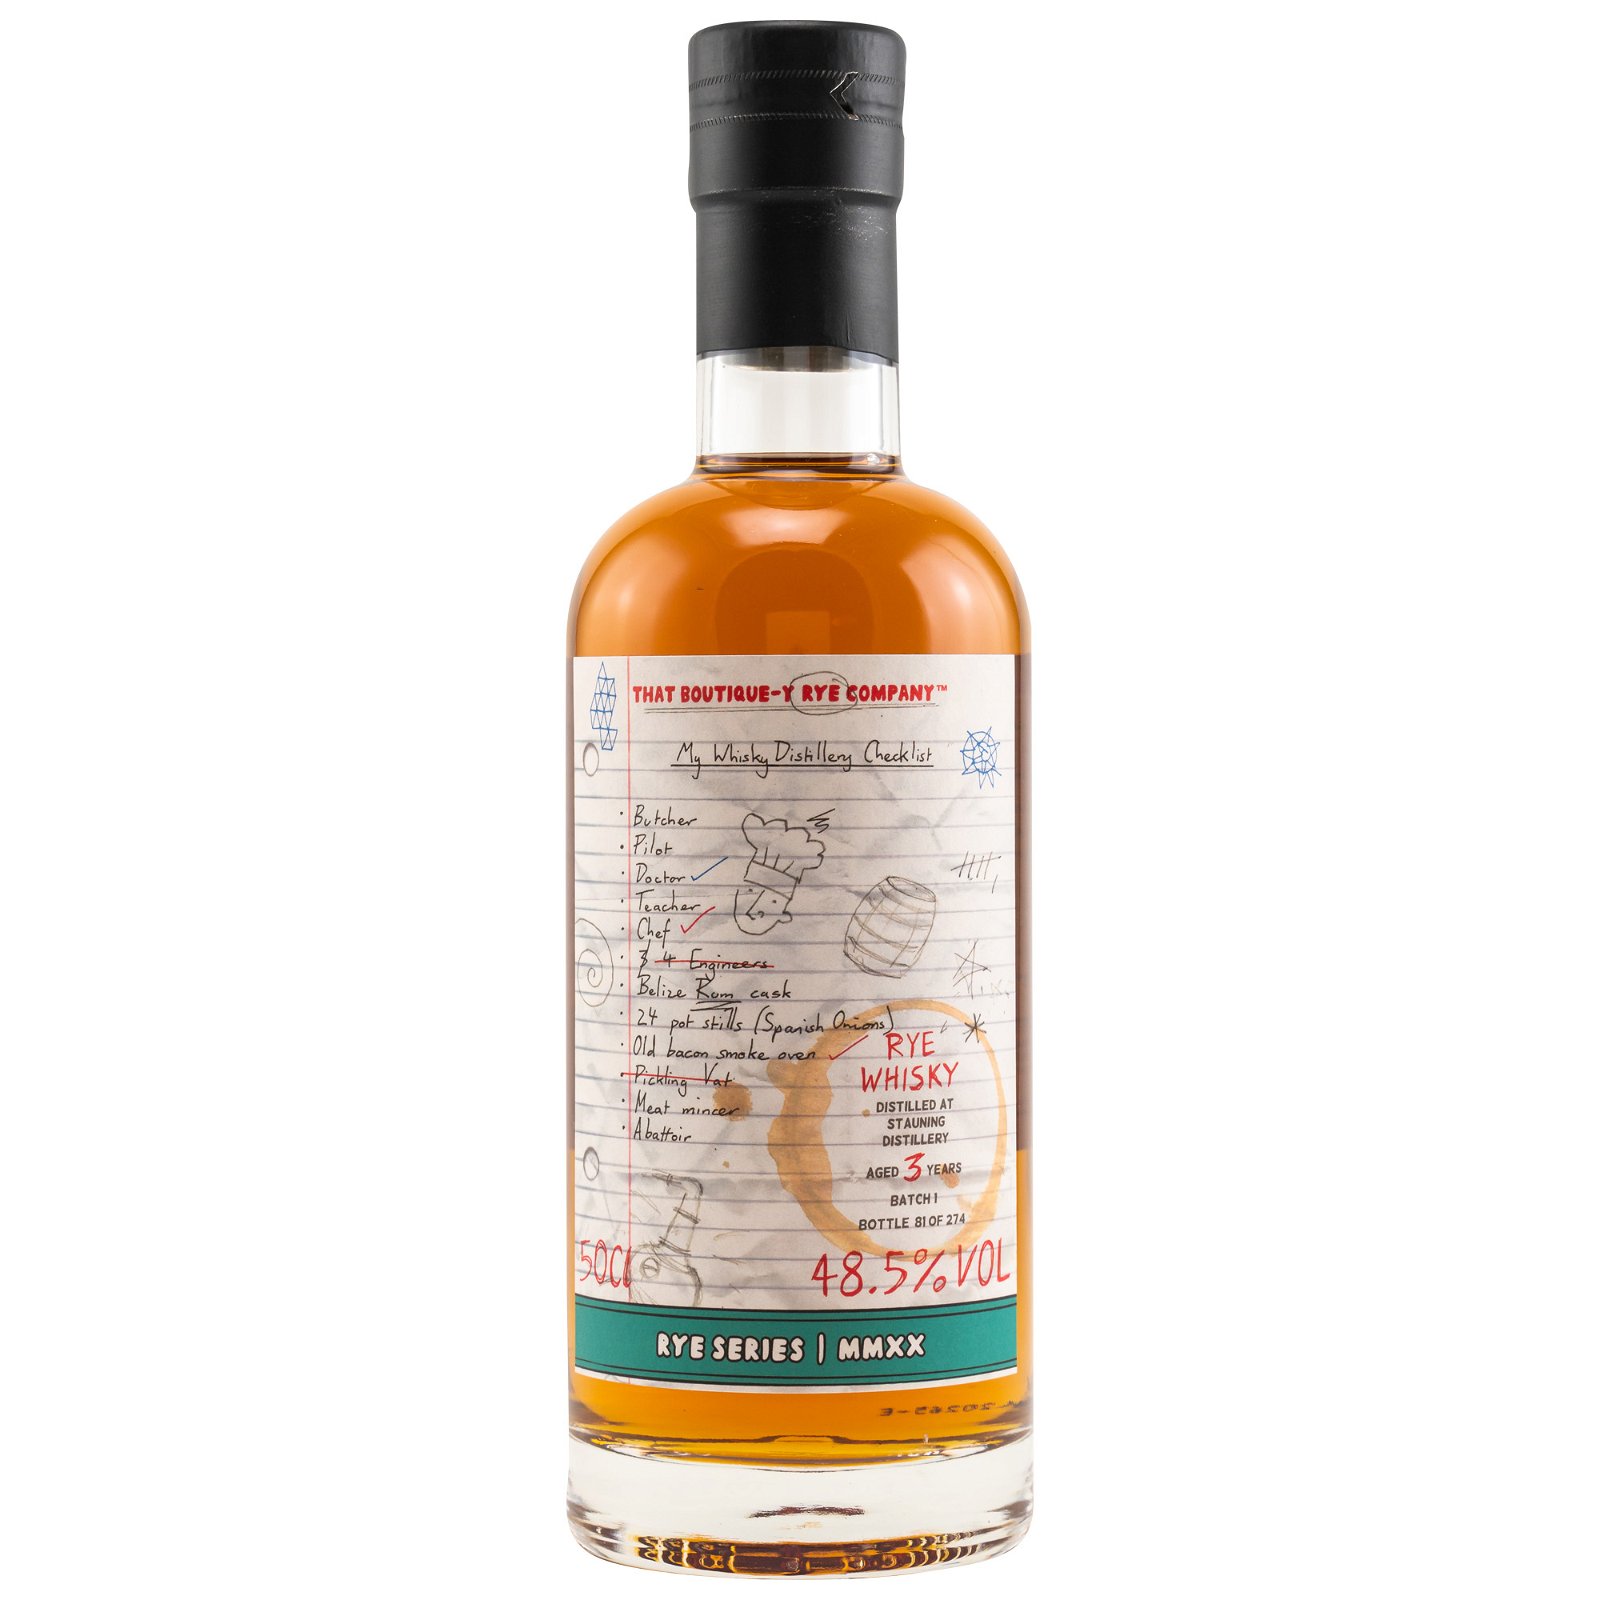 That Boutique-y Whisky Company Stauning 3 Jahre Batch 1 Rye Whisky 